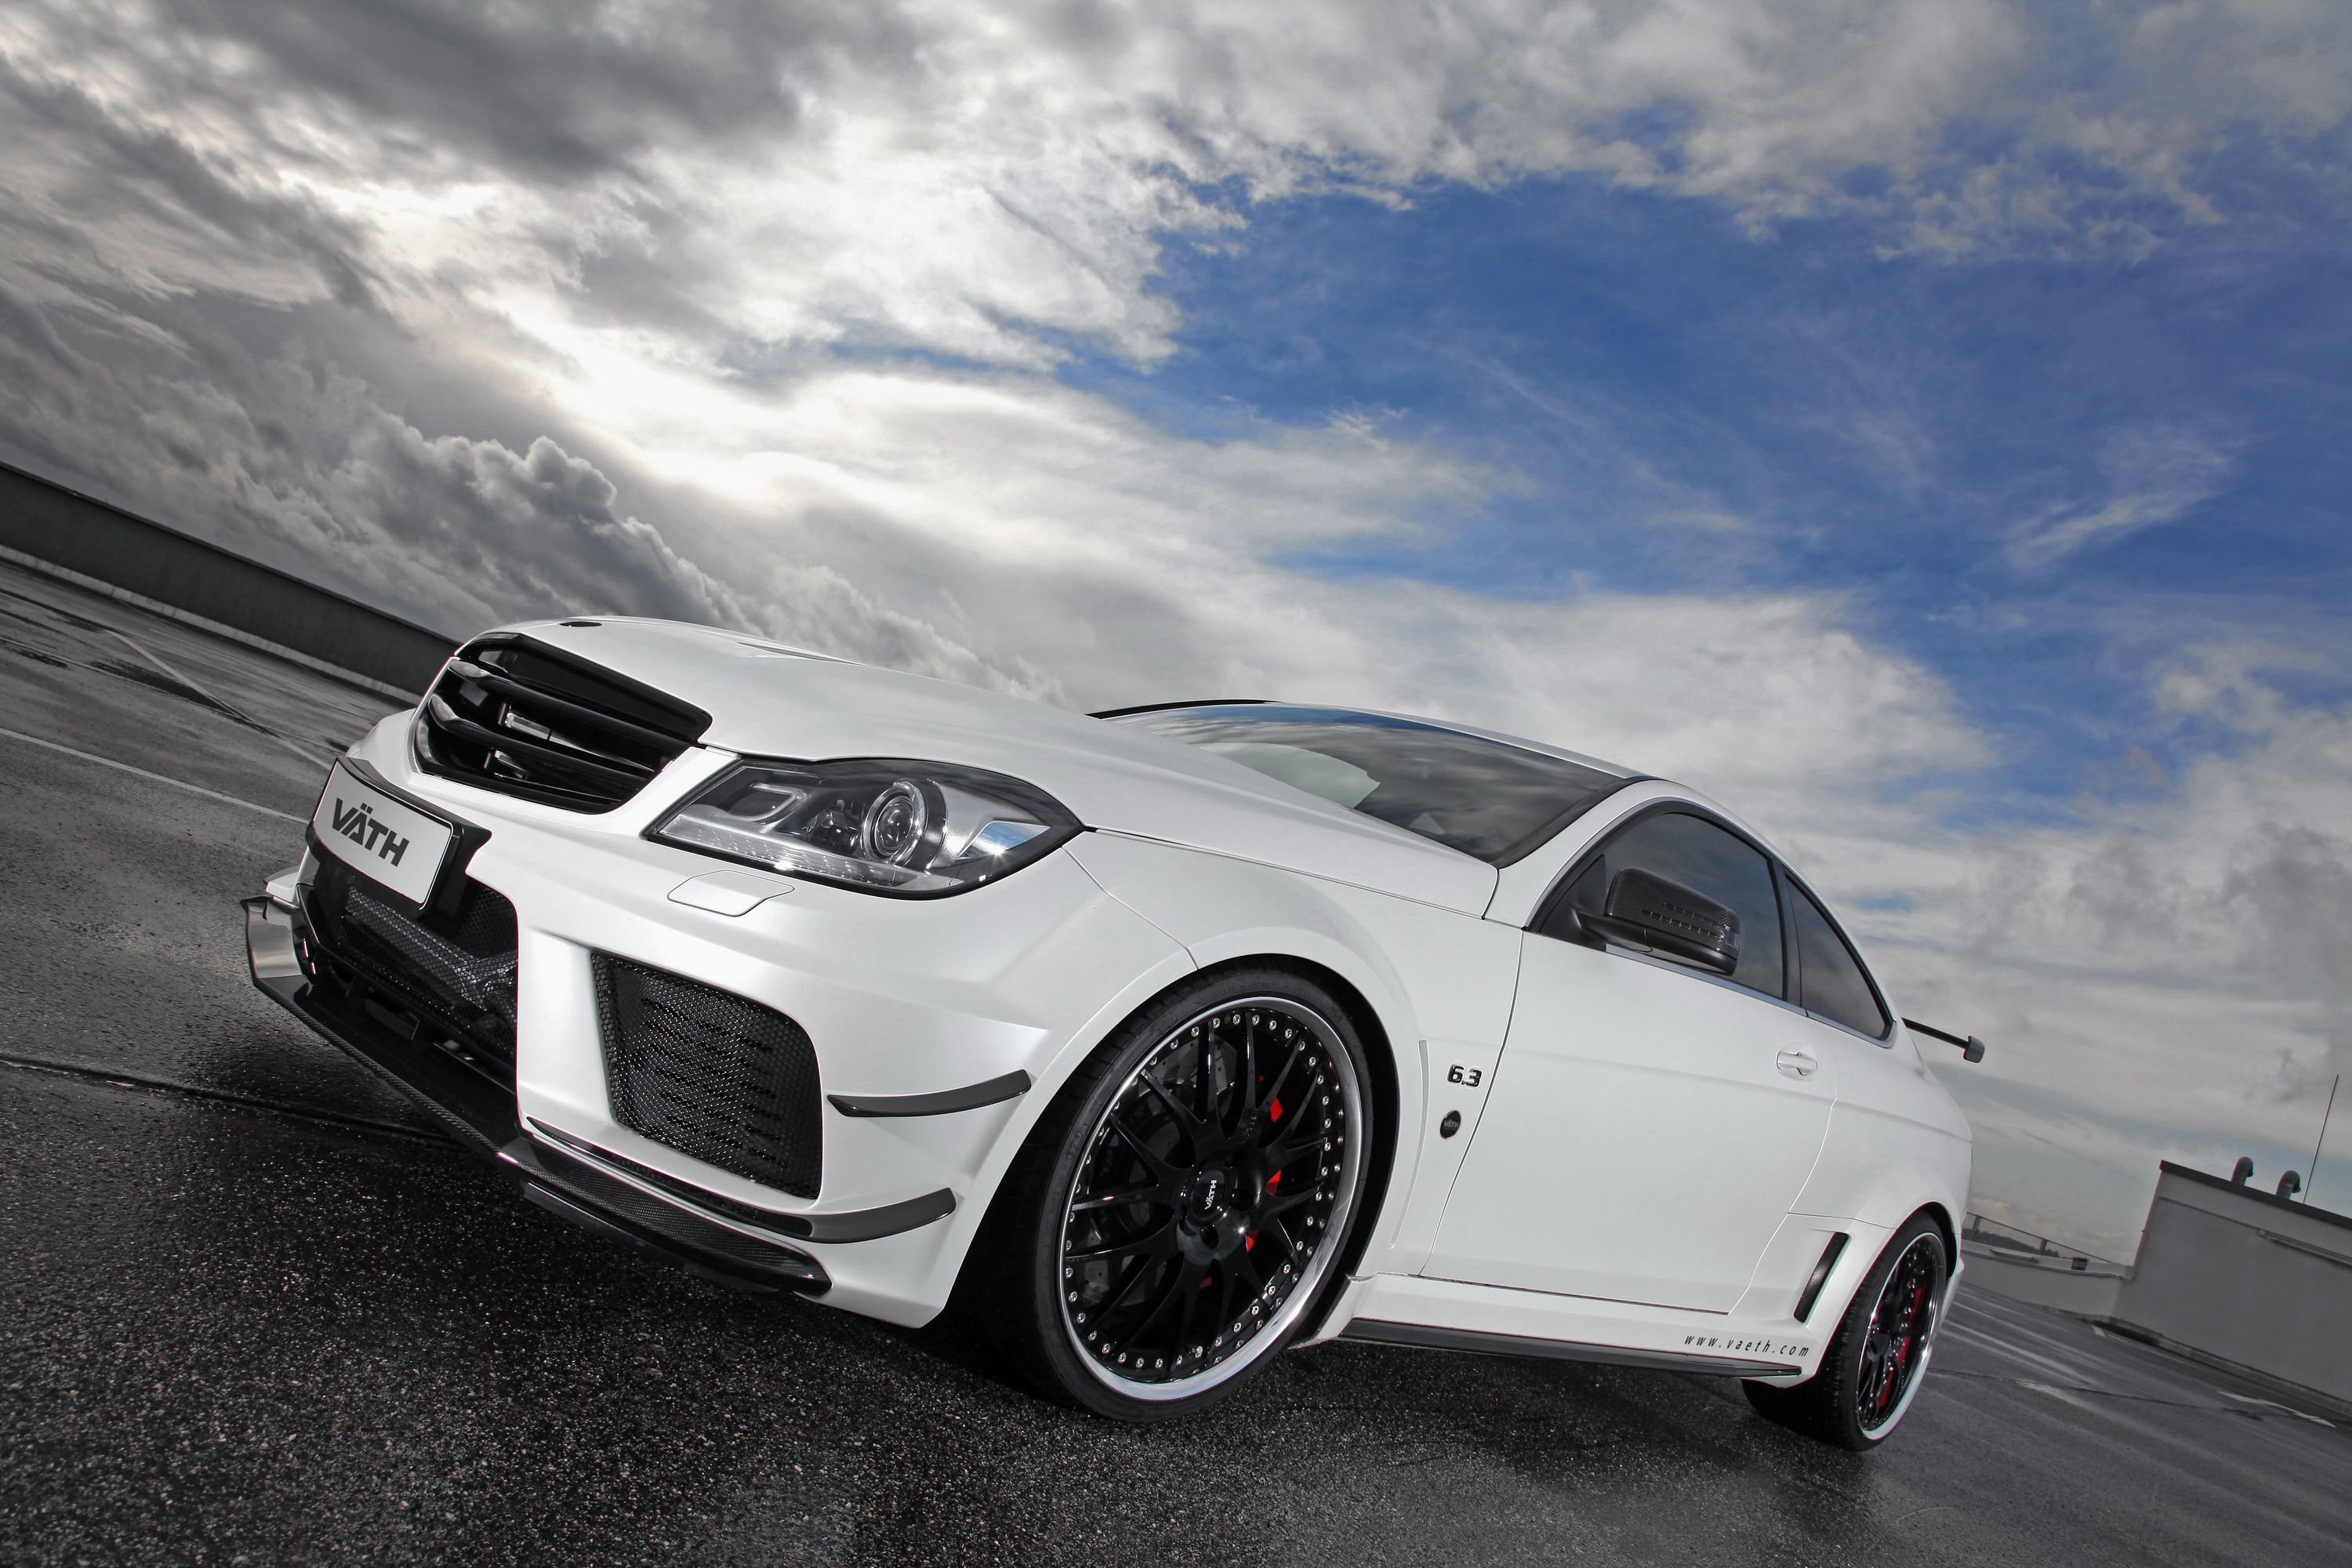 2013 Mercedes C63 Coupe Supercharged Black Series by Vath